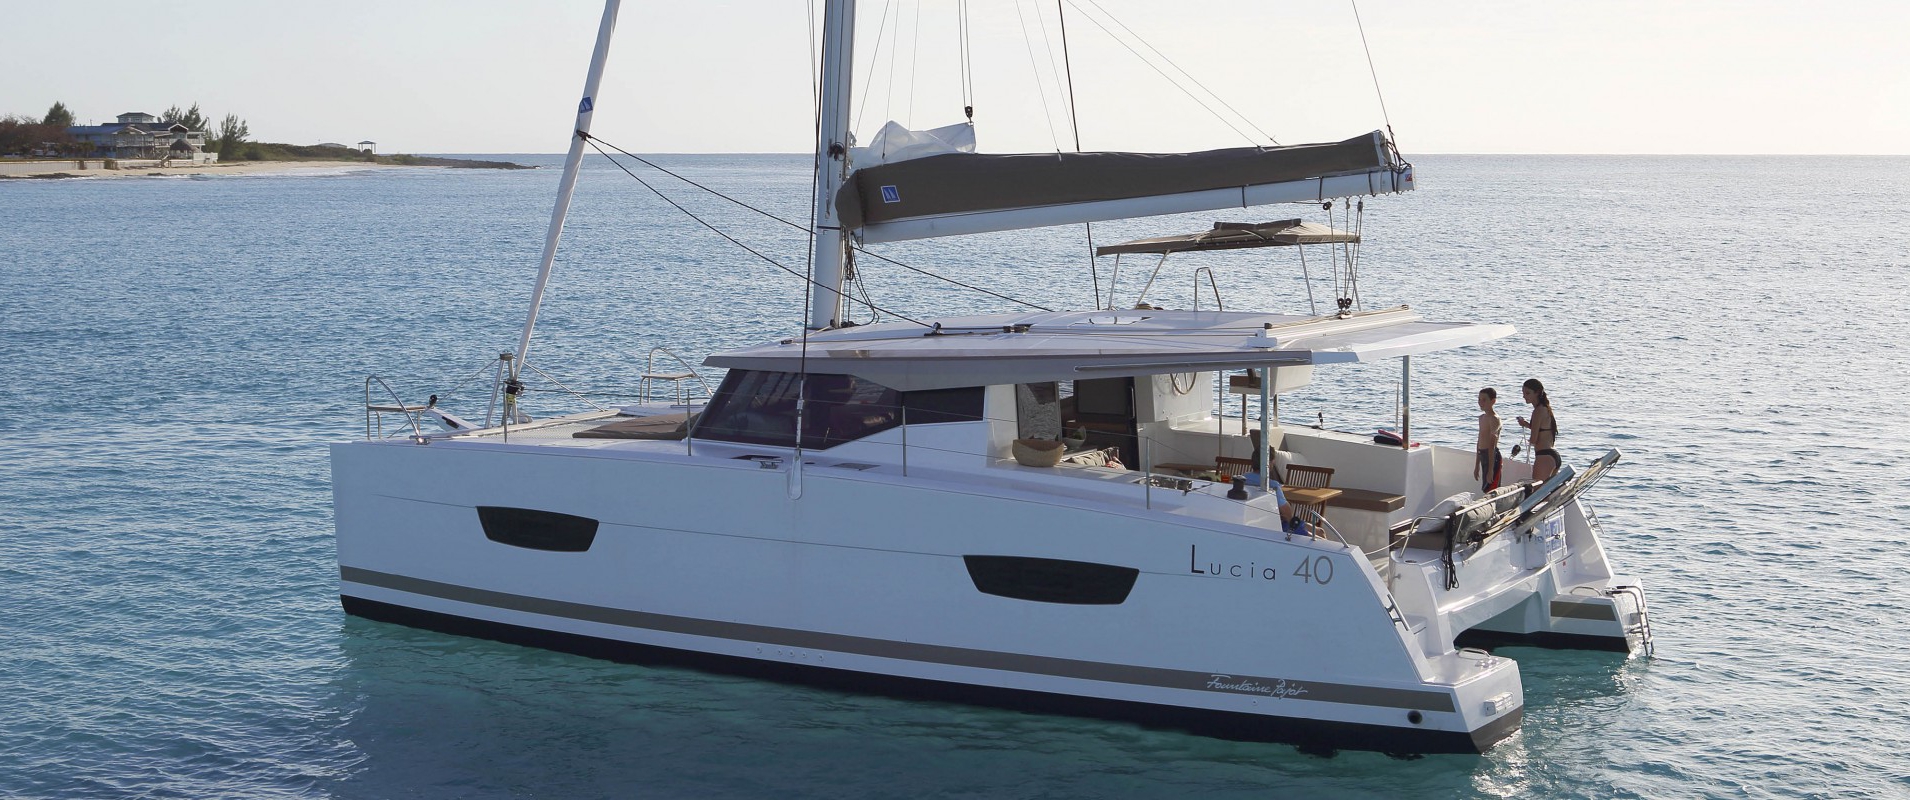 Waypoints Yacht Charters Fountaine Pajot Lucia 40 Clarity Catamaran in St. Thomas